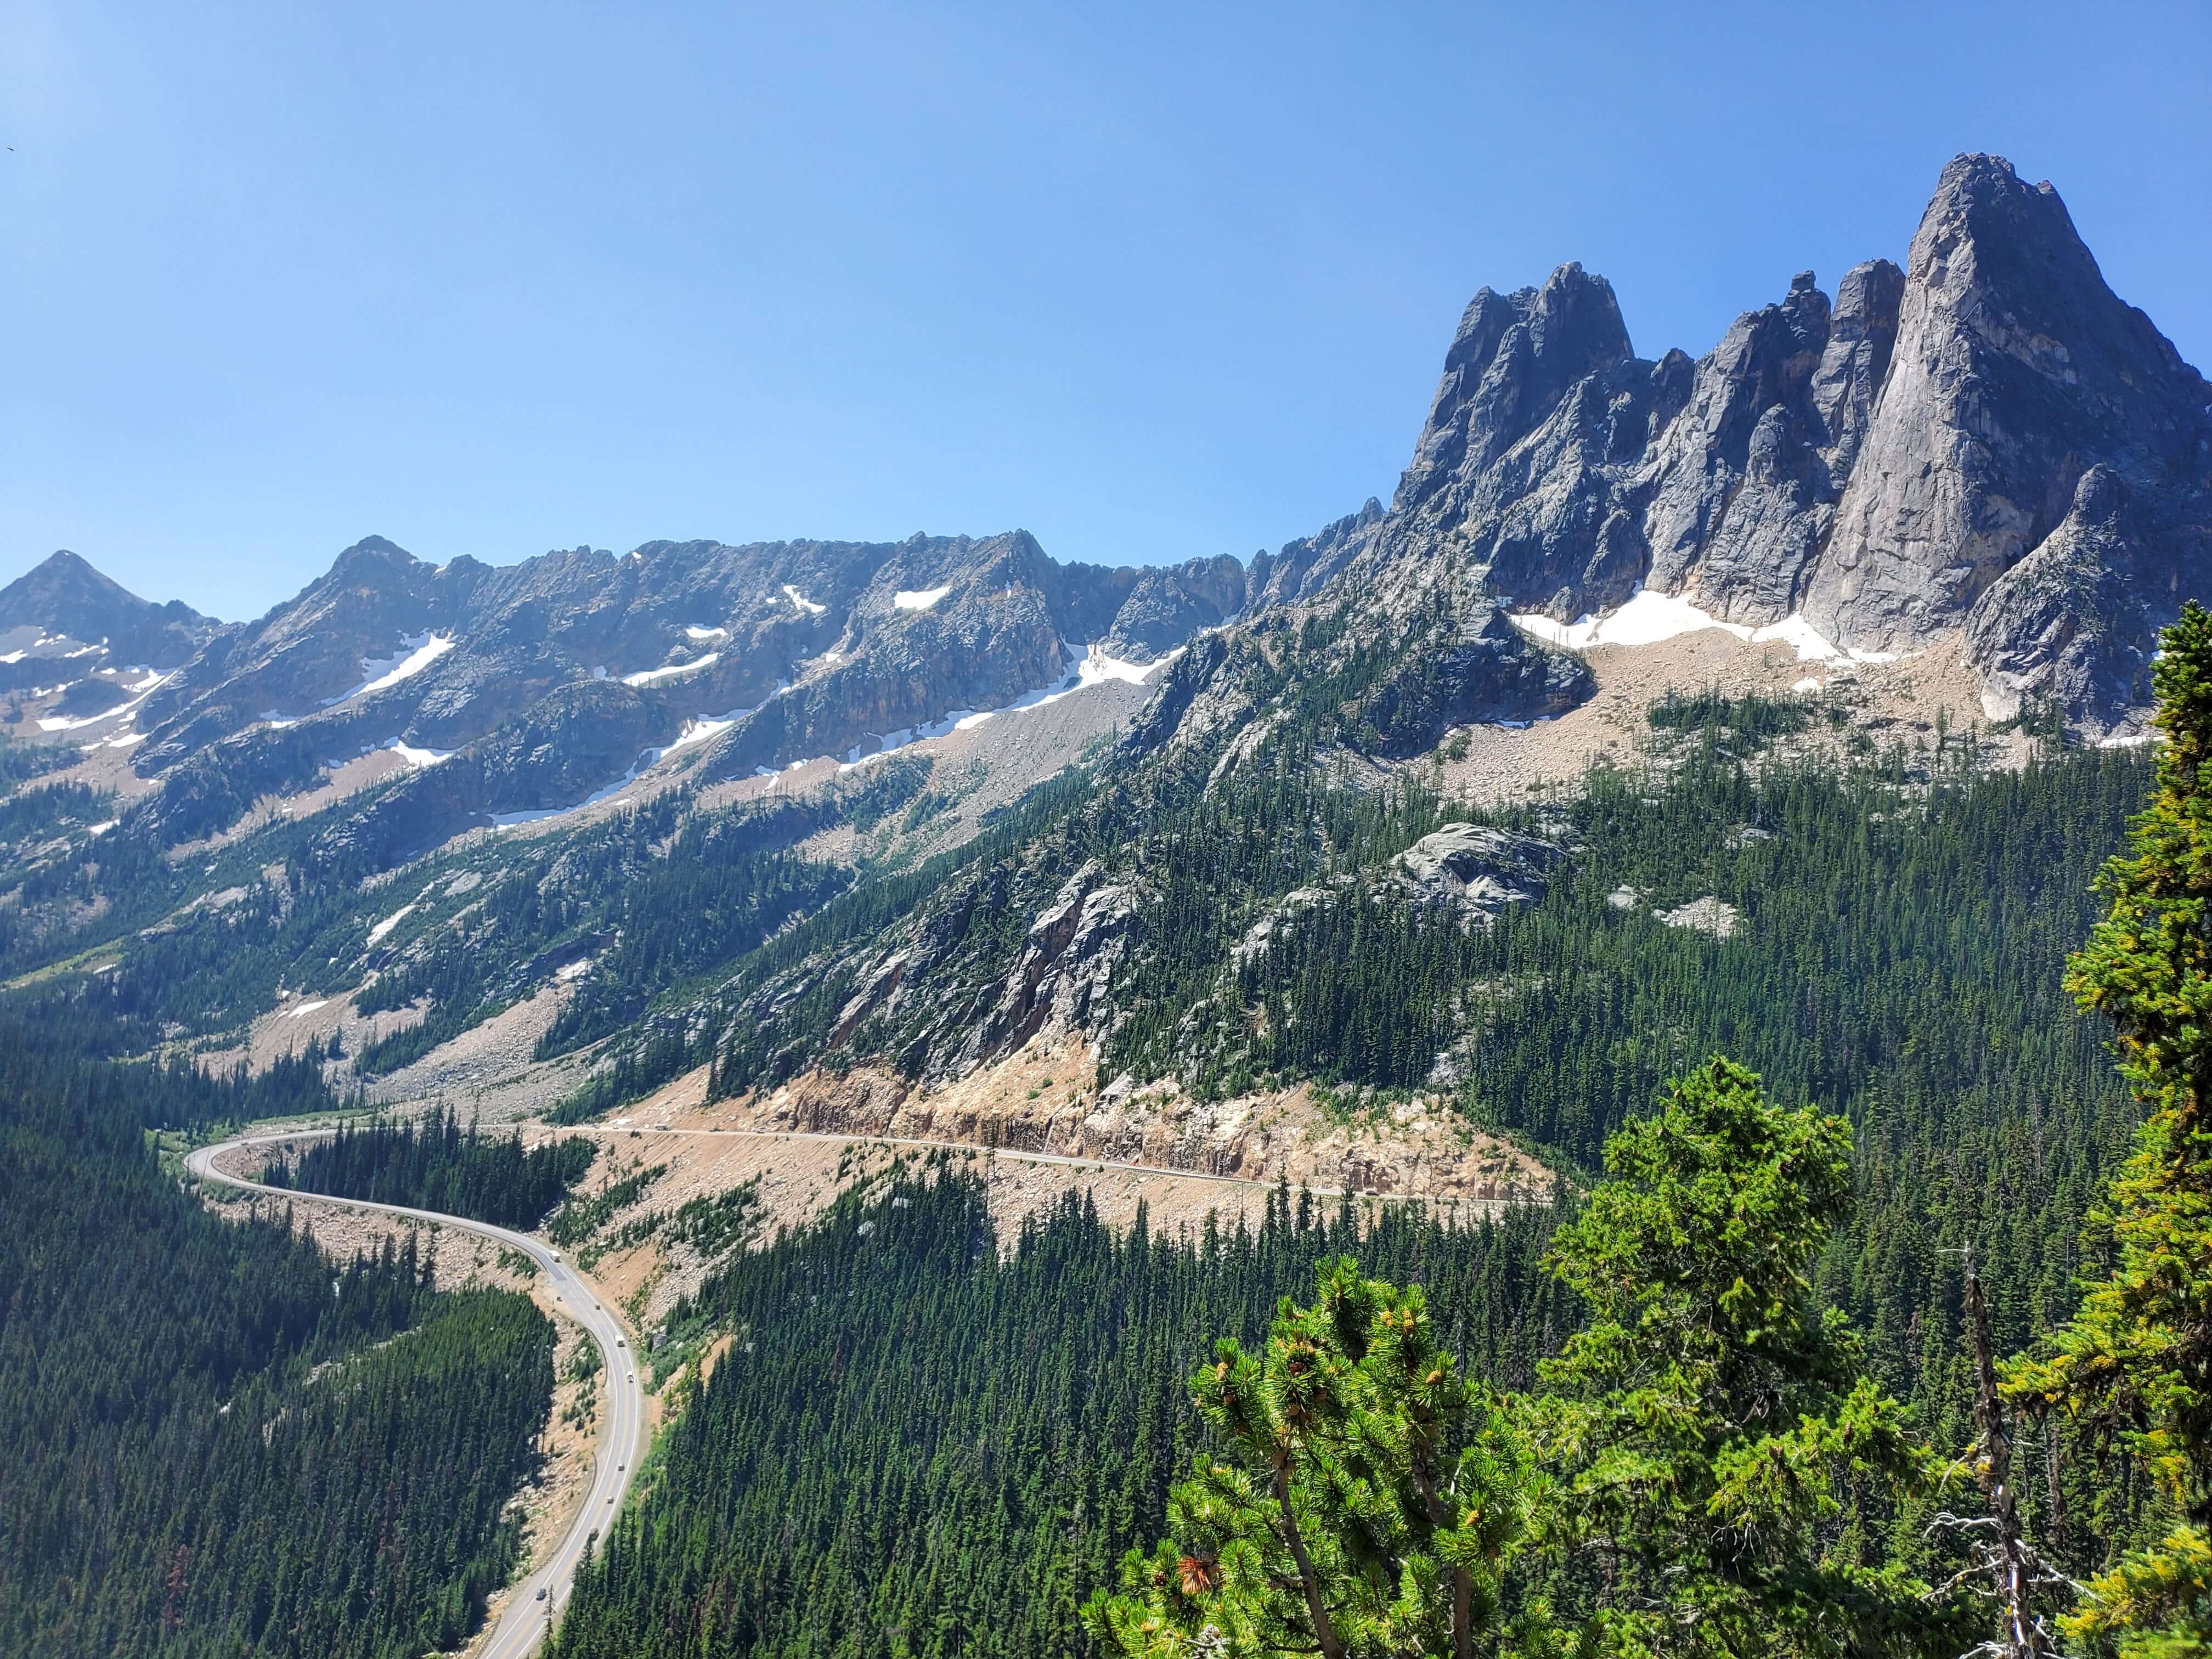 View of Liberty Bell Peak from Washington Pass Observation Site near North Cascades National Park